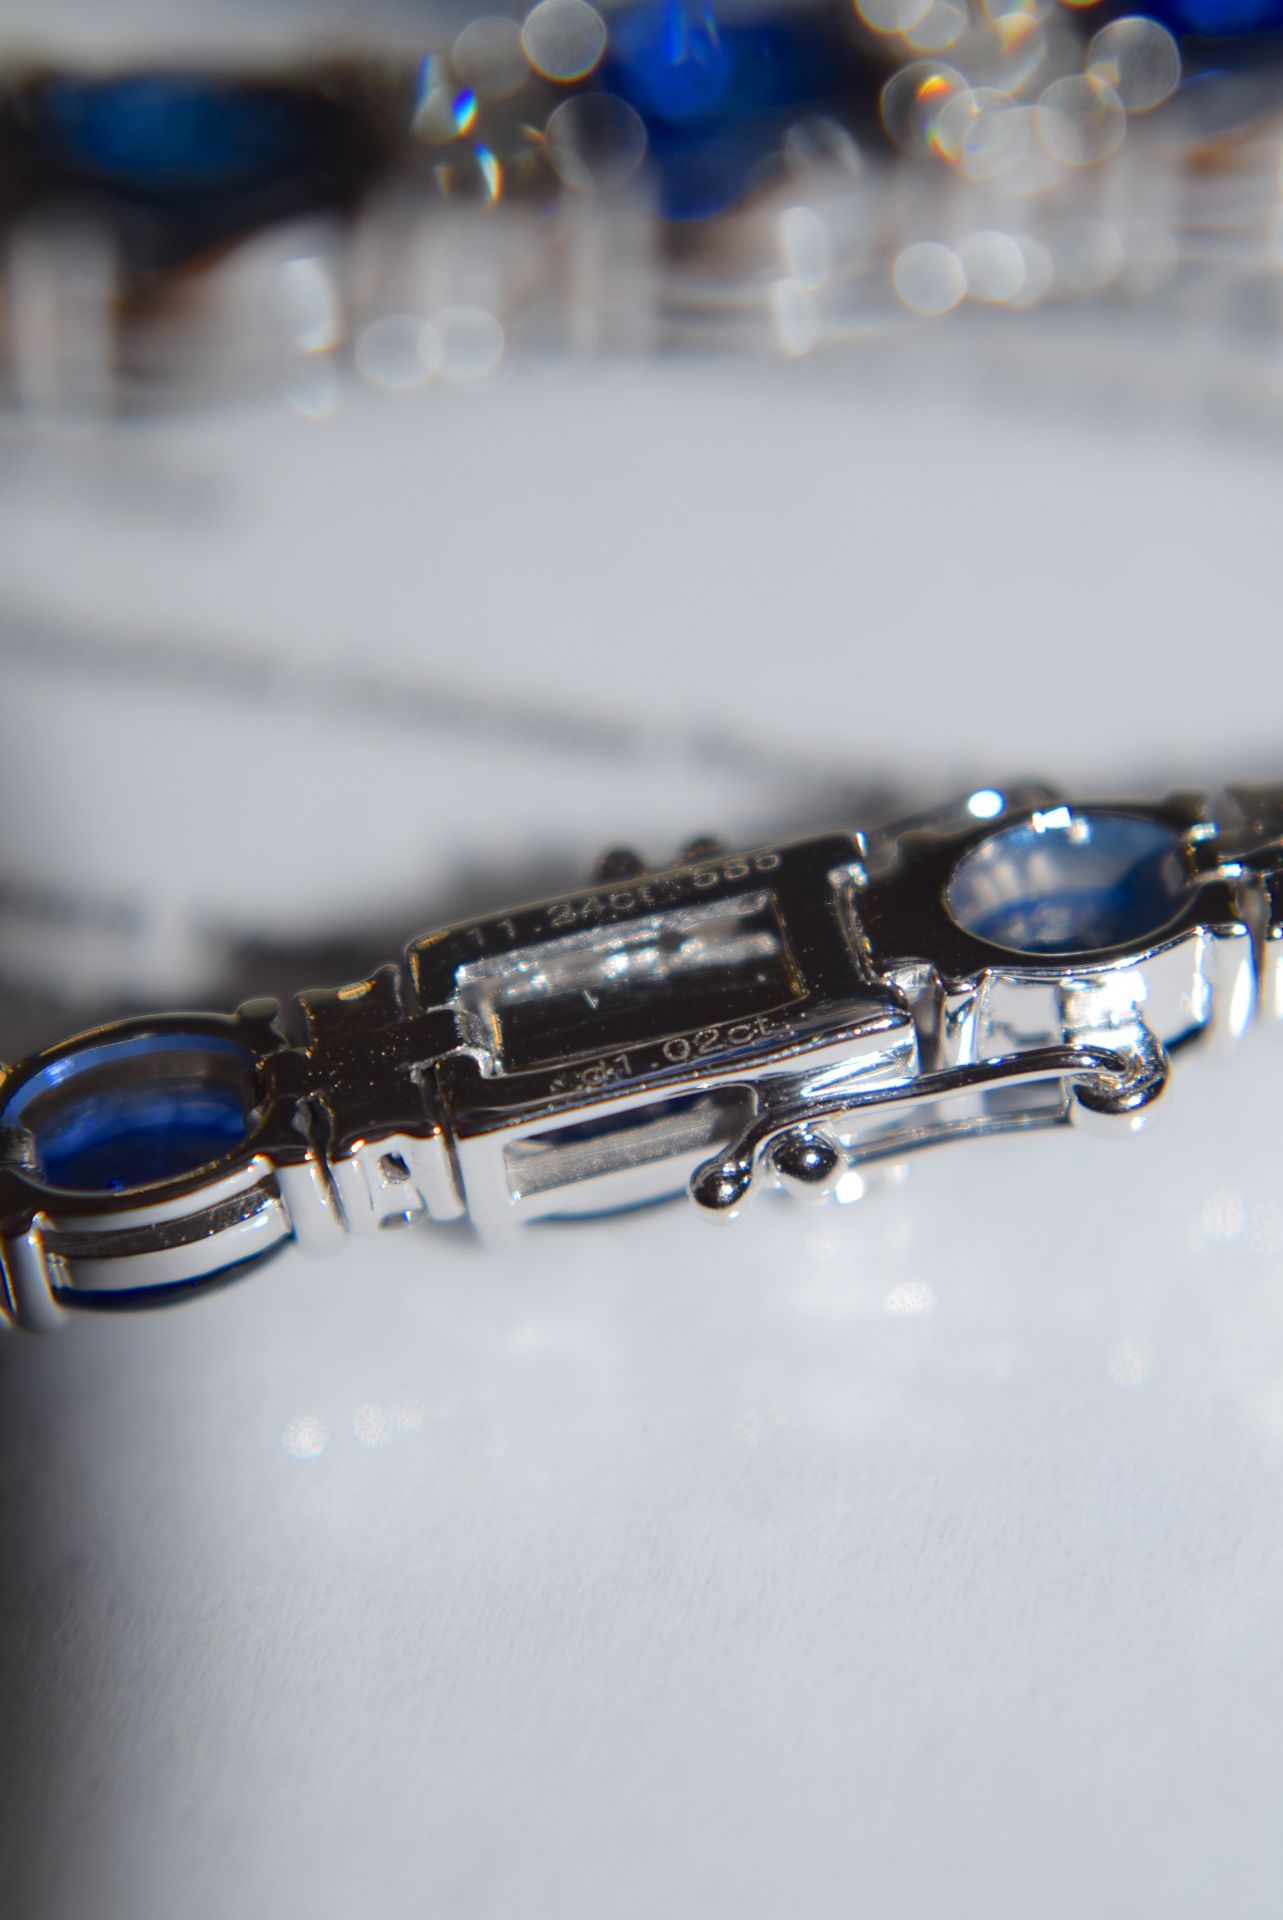 12.26CT BLUE SAPPHIRE & DIAMOND TENNIS BRACELET IN WHITE GOLD WITH BOX & CERTIFICATE CARD - Image 4 of 6